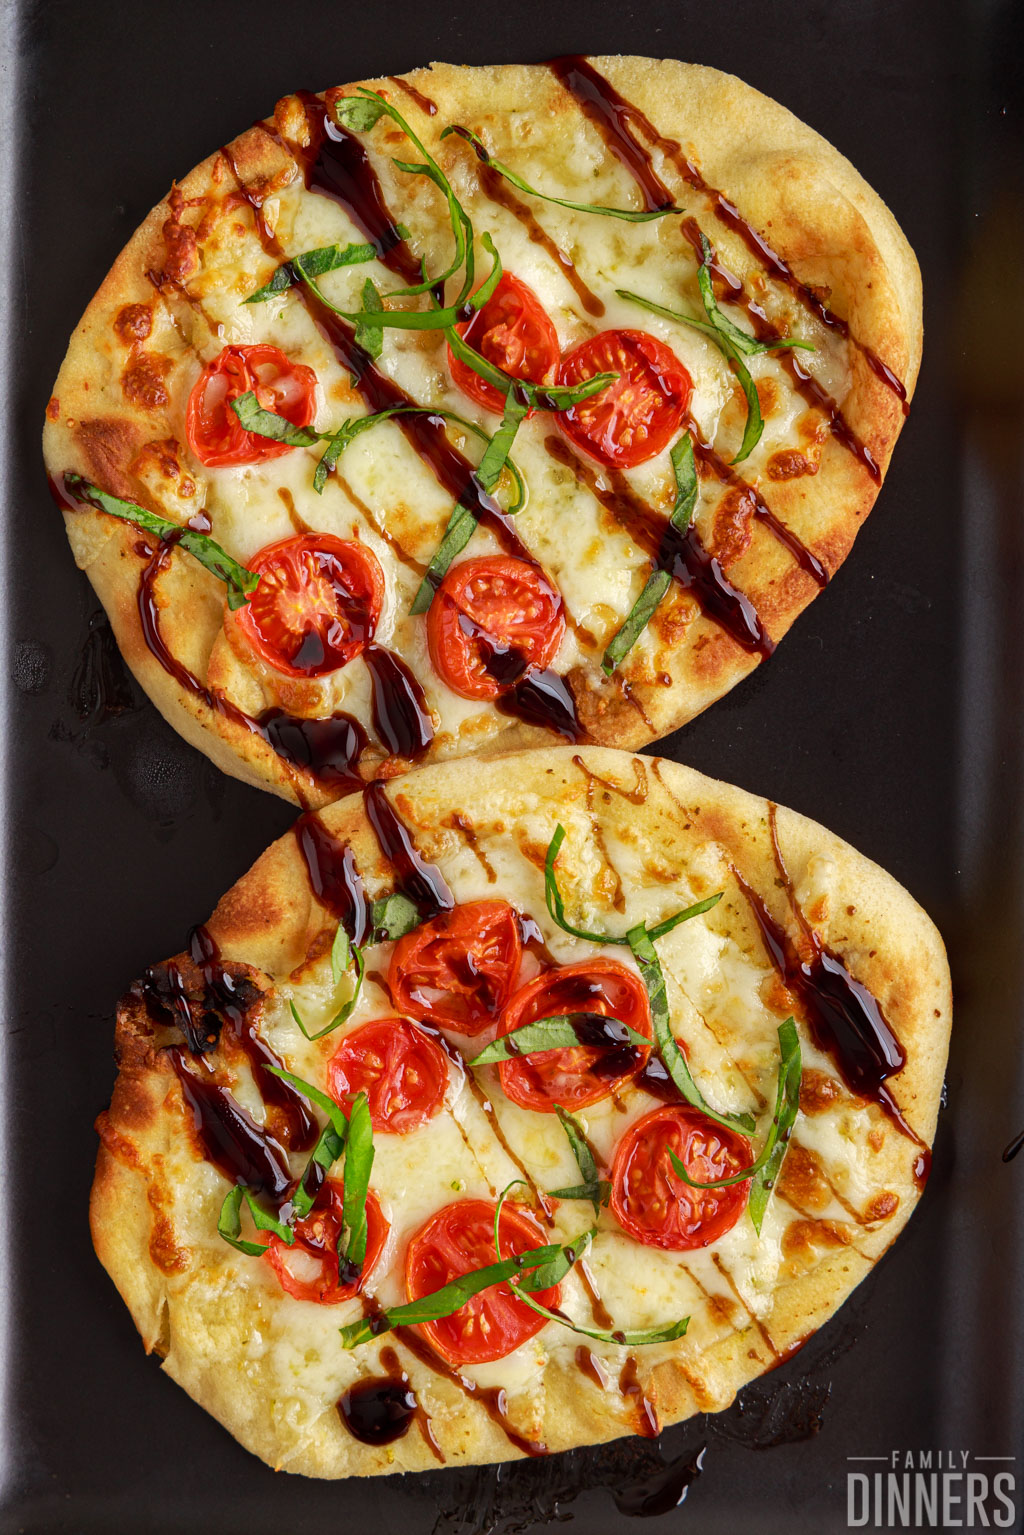 Two caprese pizzas on naan bread.